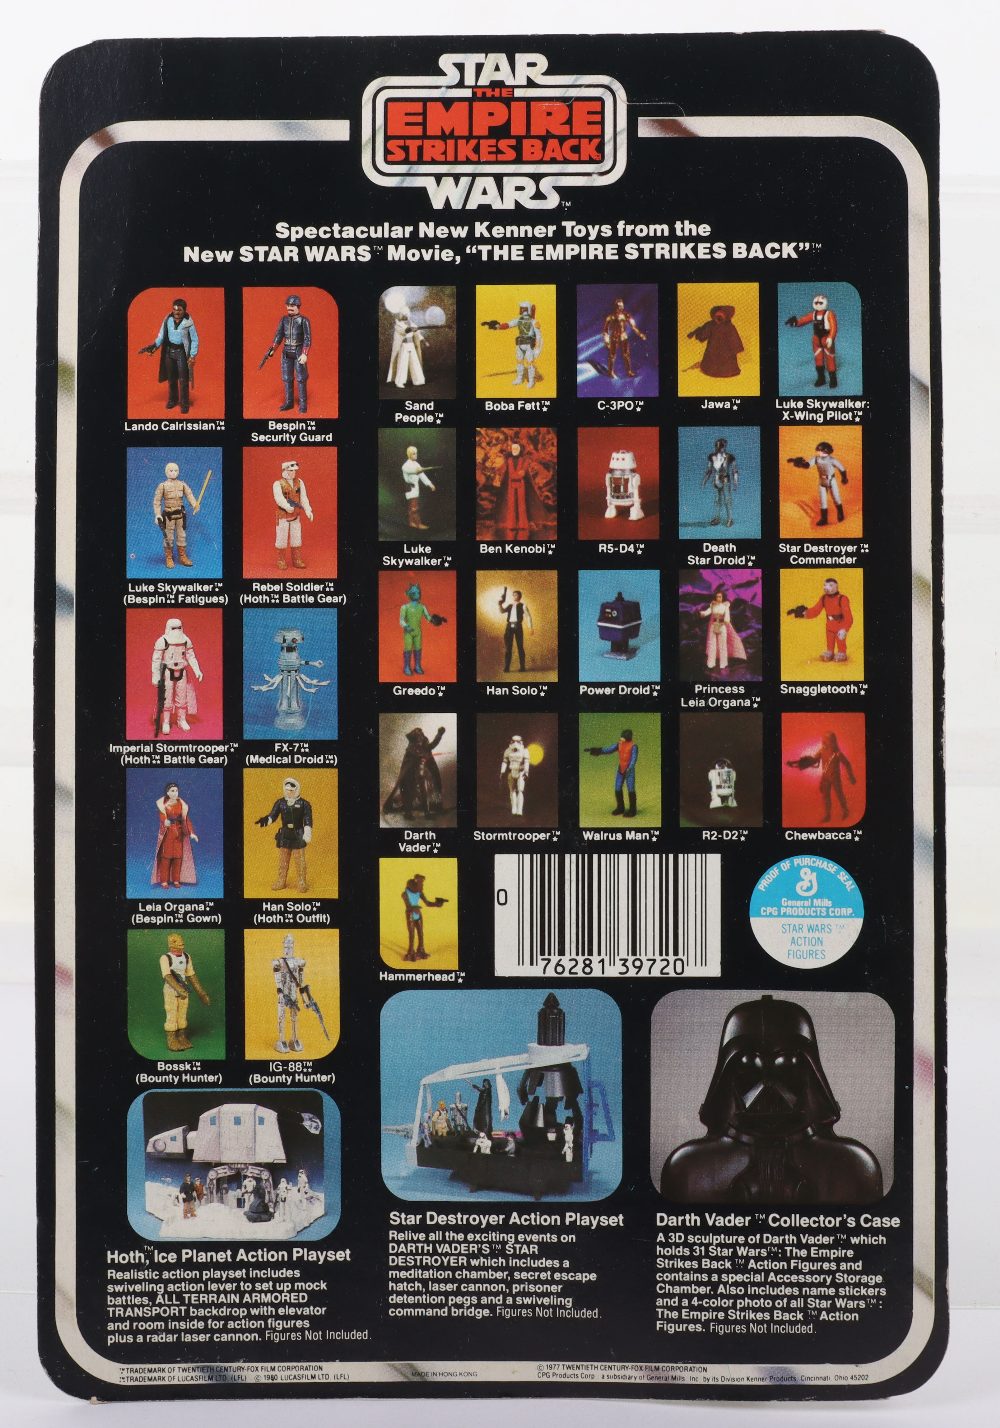 Kenner Star Wars ‘The Empire Strikes Back’ Leia Organa (Bespin Gown) Vintage Original Carded Figure - Image 2 of 7